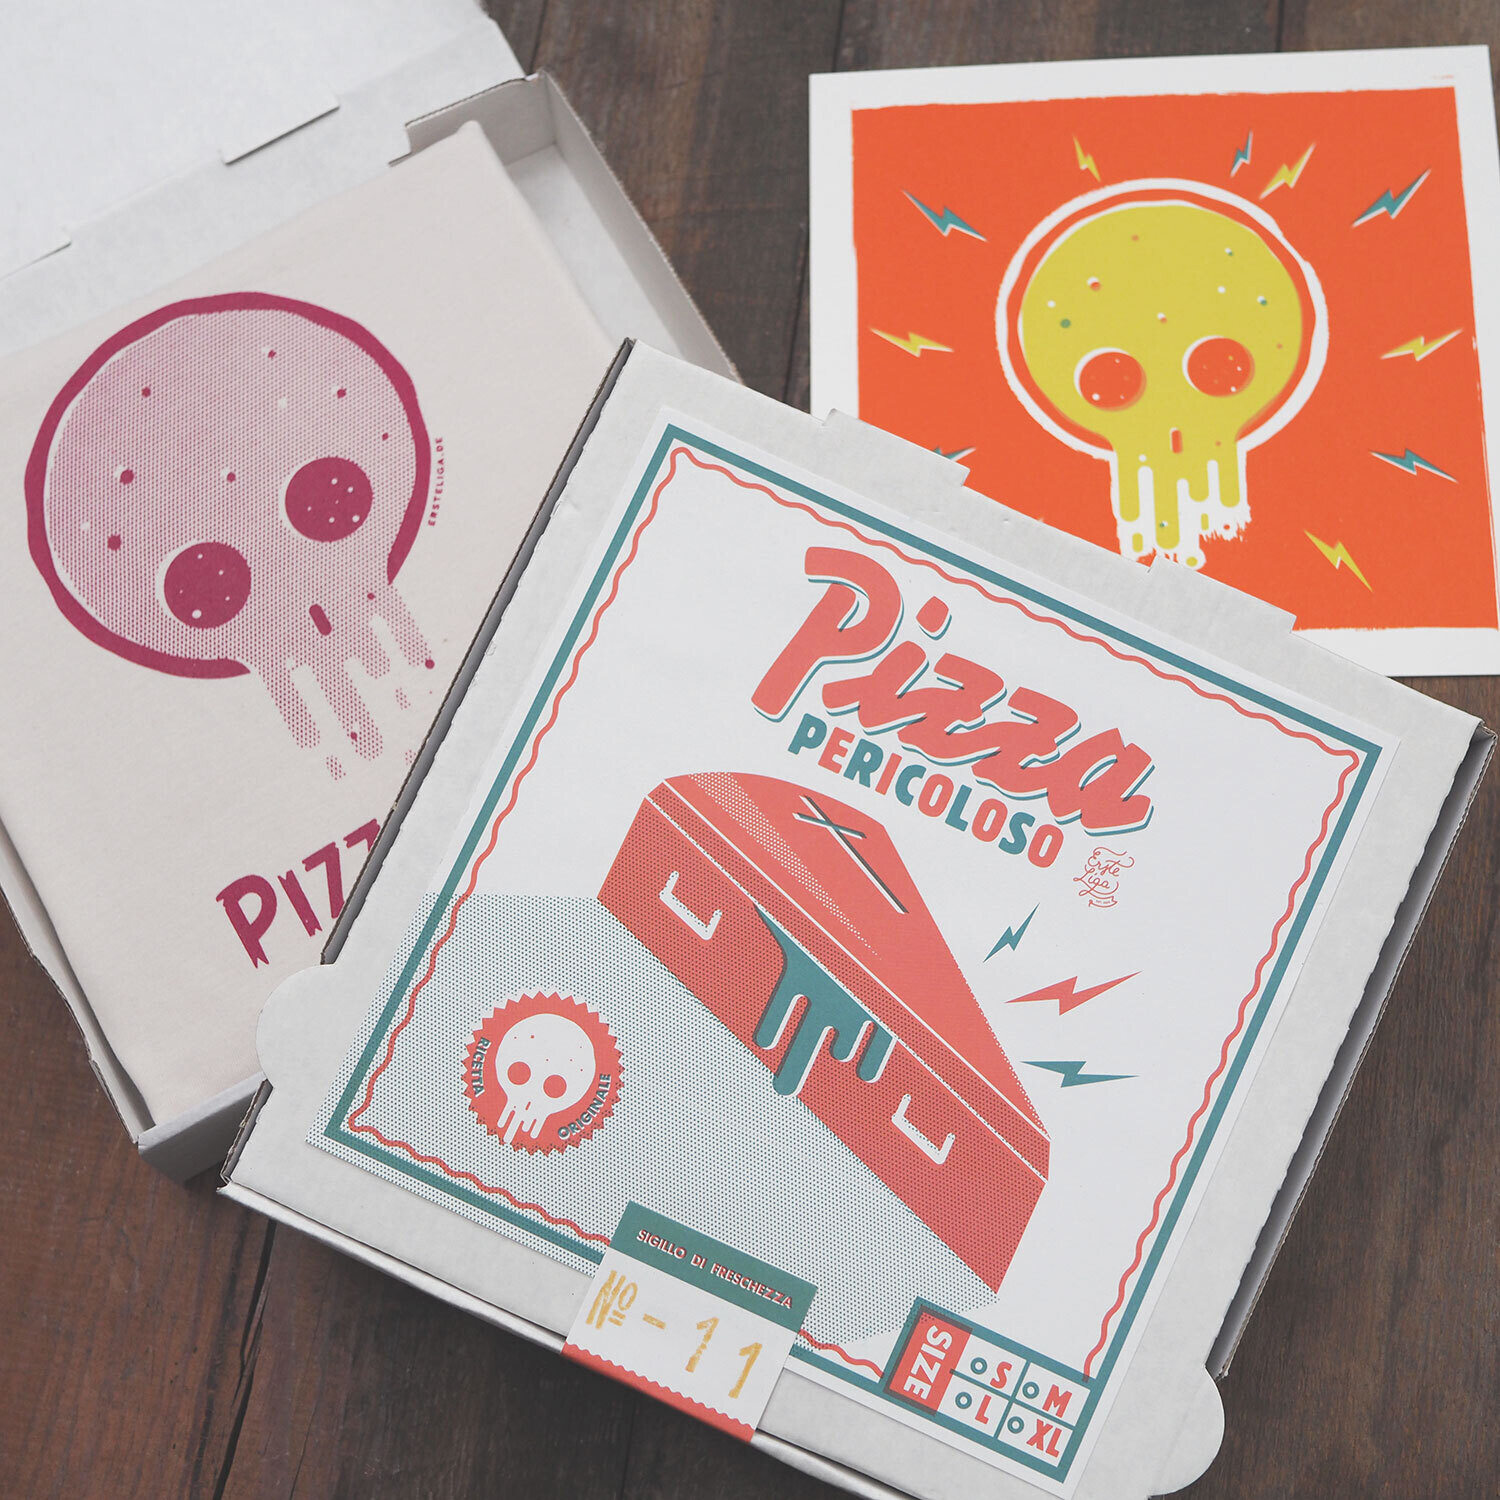 Pizzargh! Pack deluxe